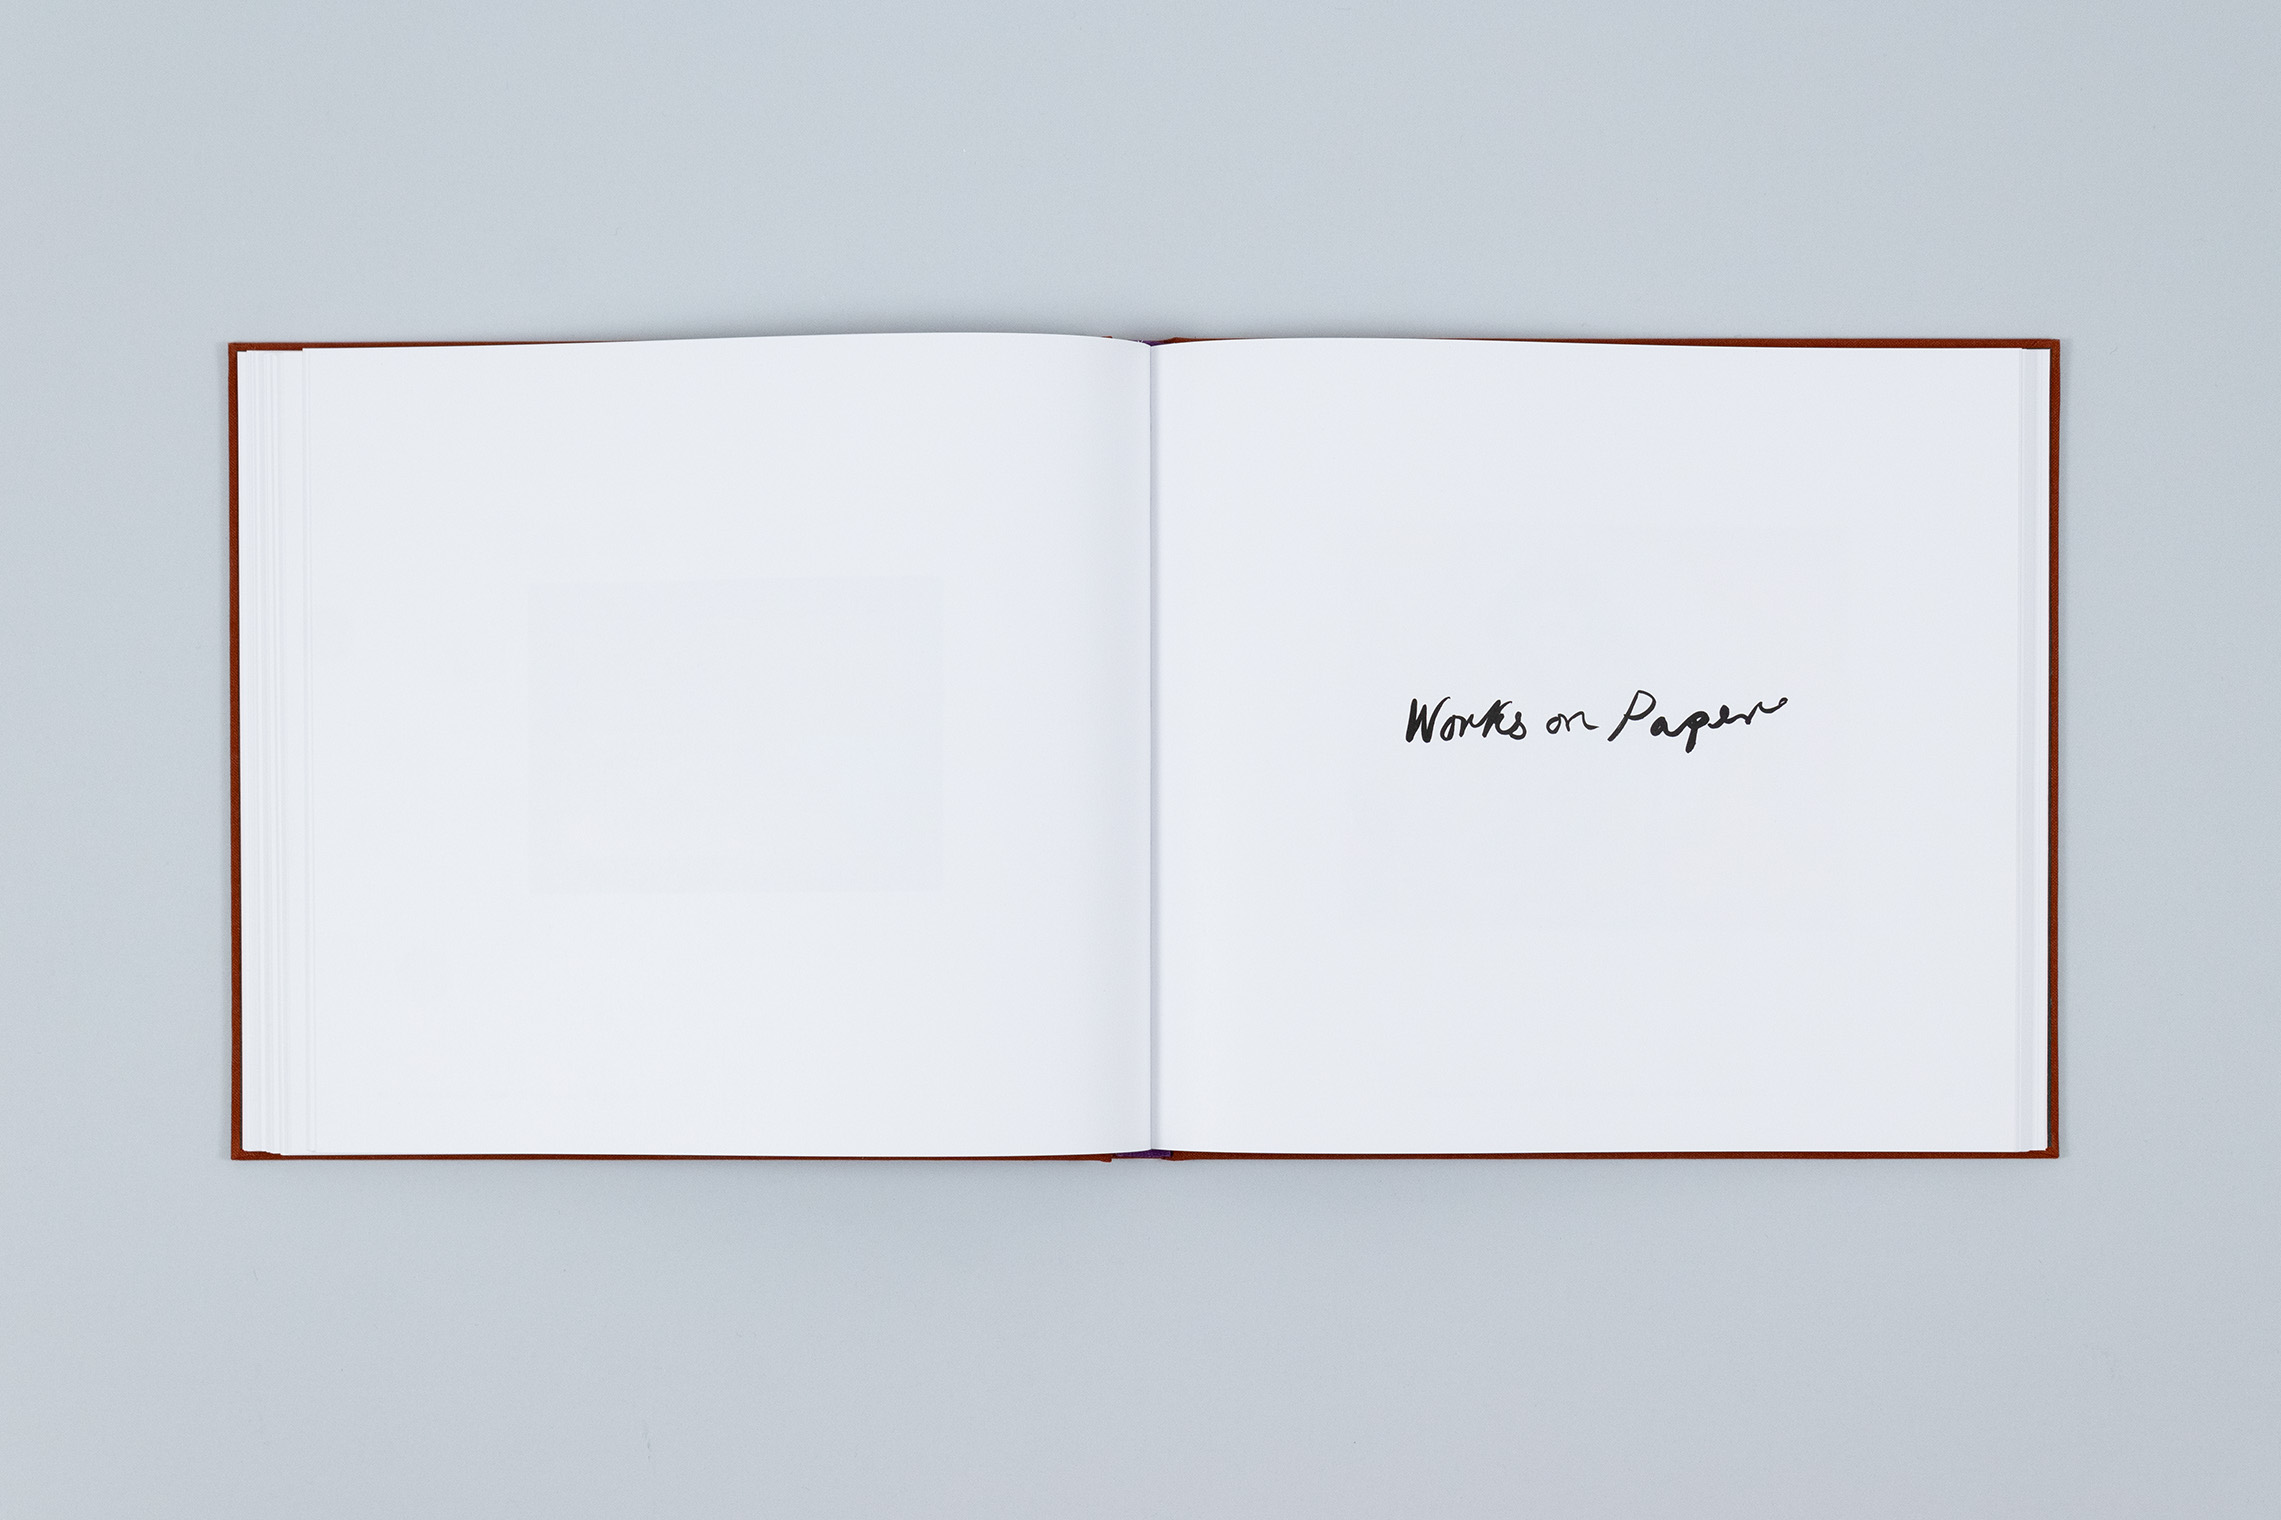 Carole Gibbons monograph spread showing the title 'Works on Paper' in Gibbons' handwriting